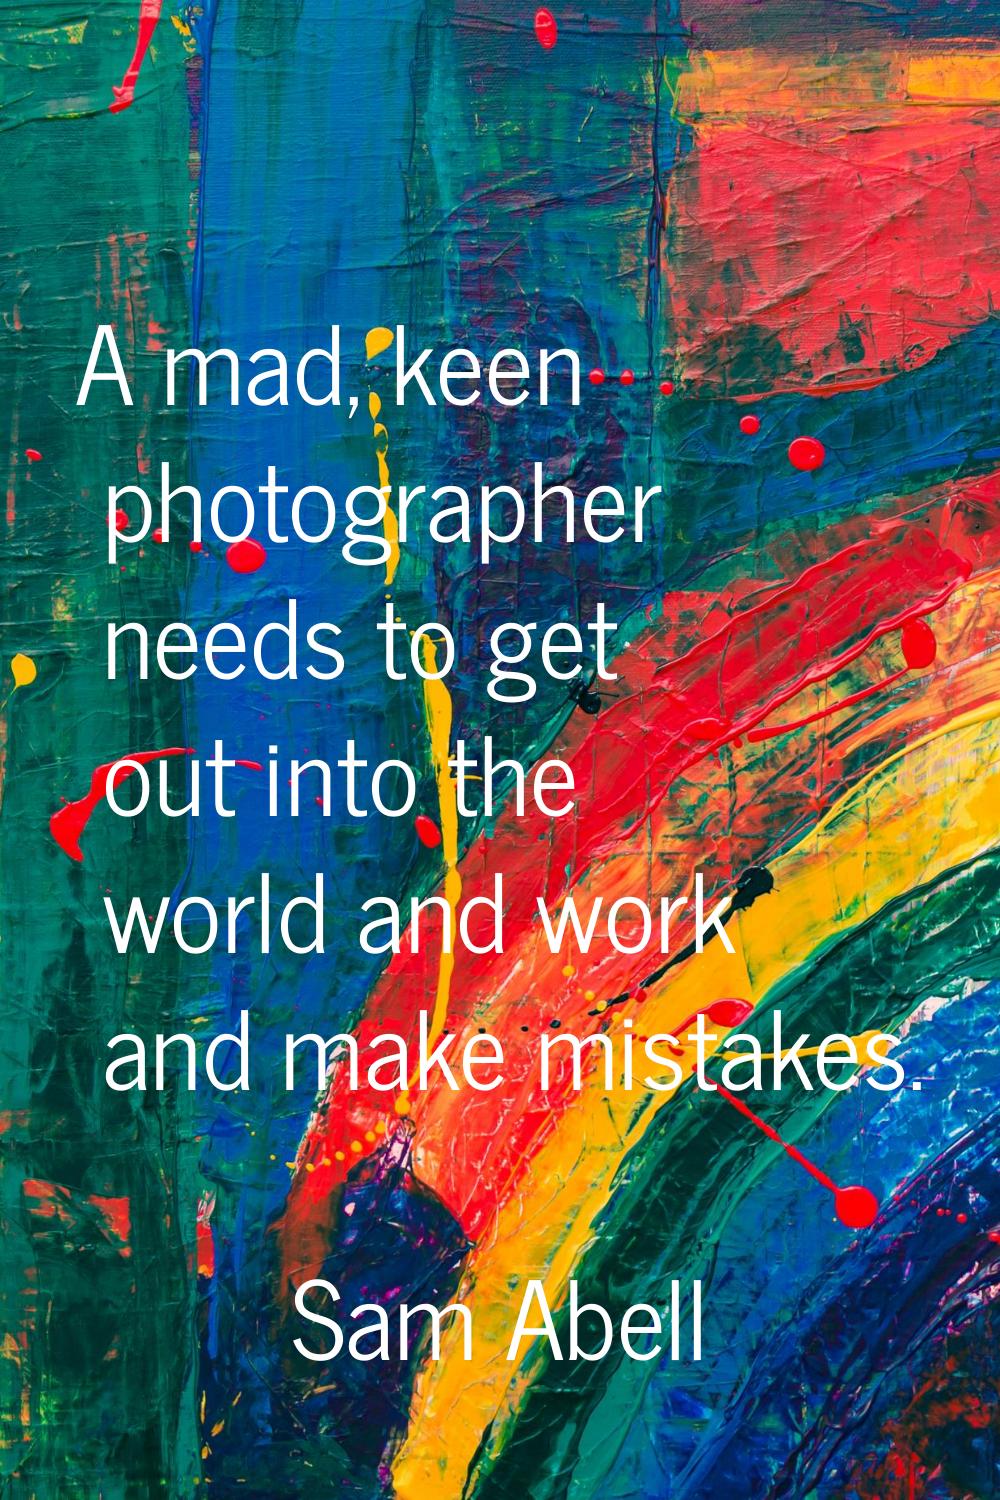 A mad, keen photographer needs to get out into the world and work and make mistakes.